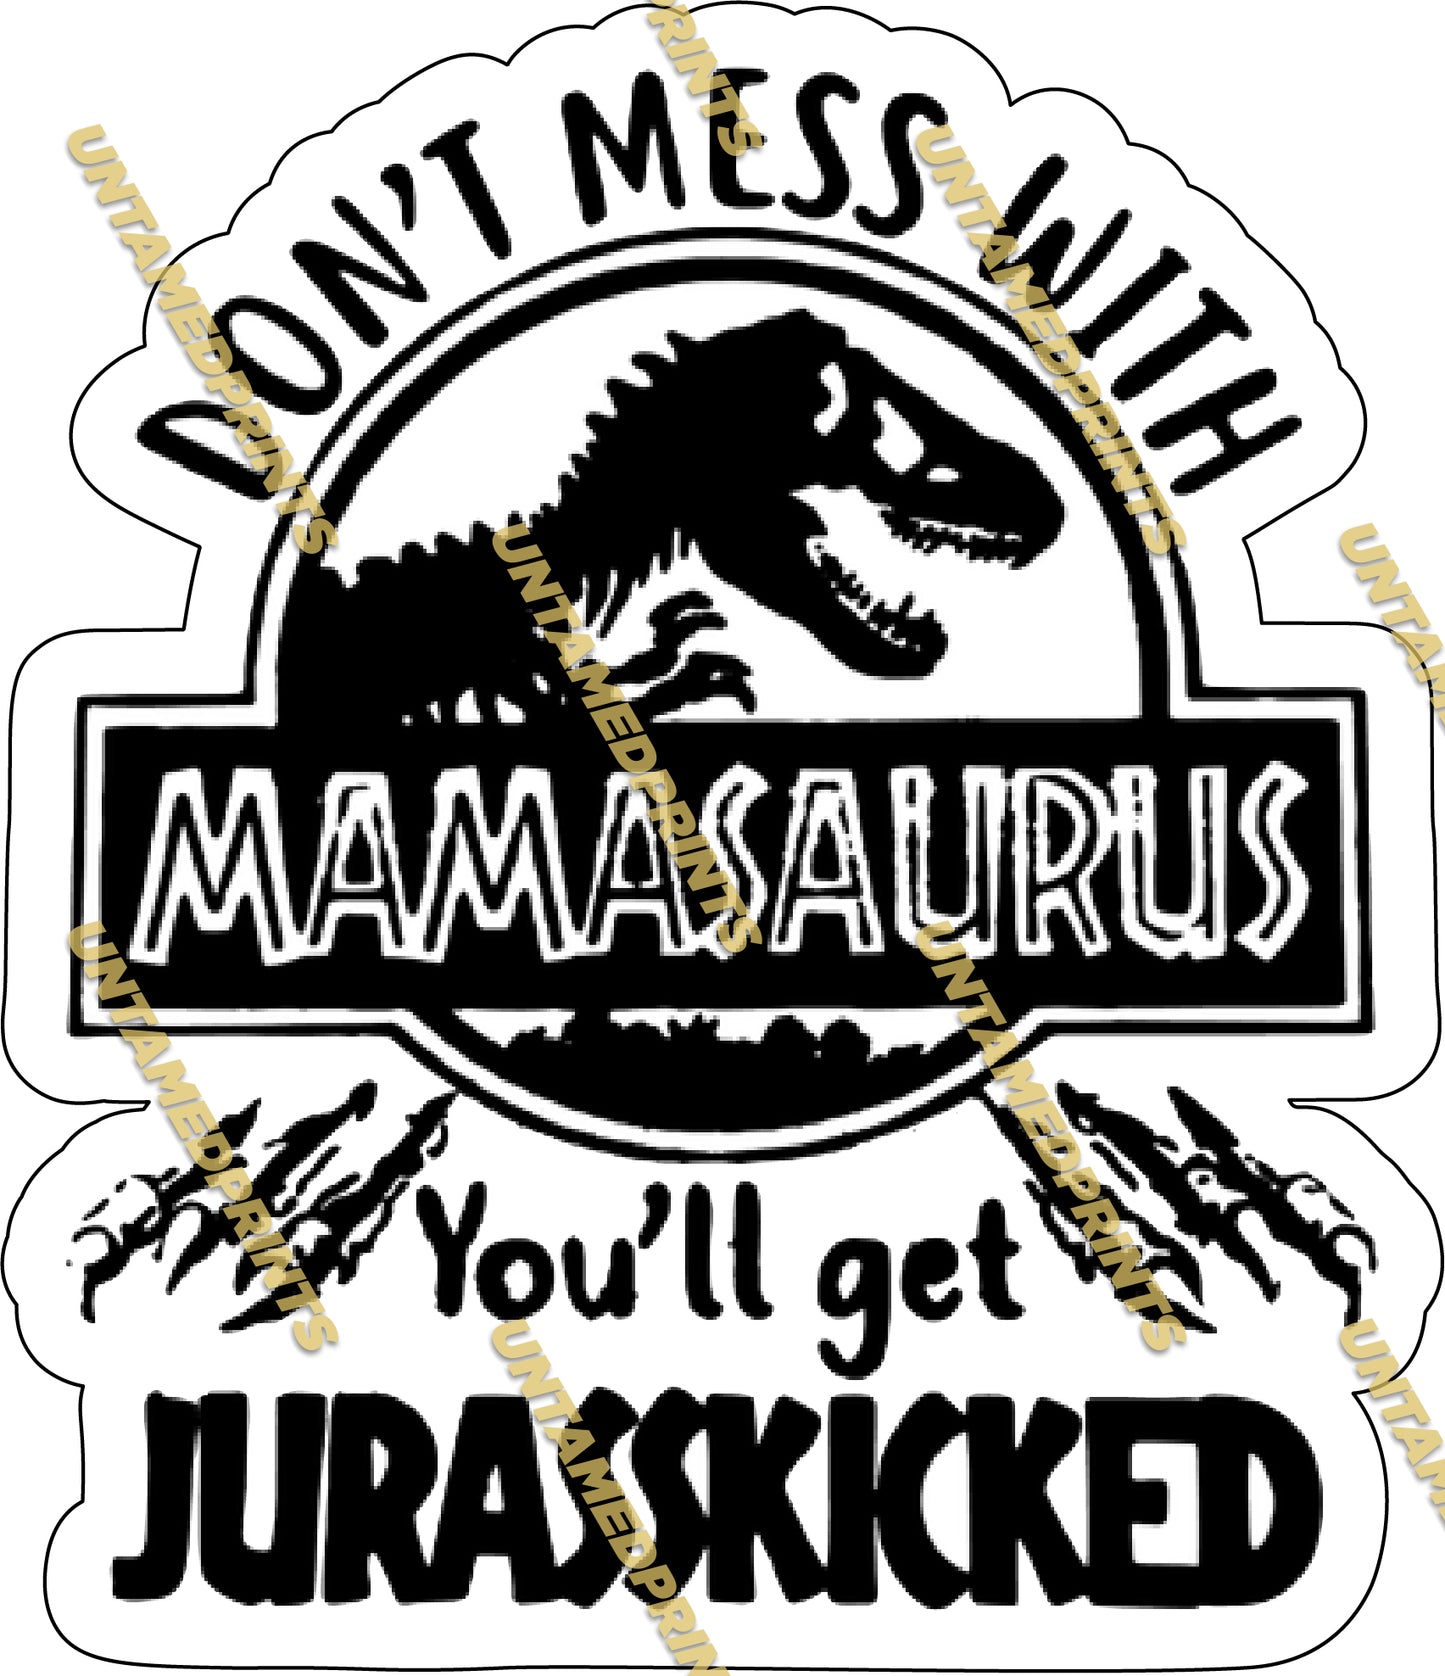 Dont mess with Mamasaurus youll get Jurasskicked